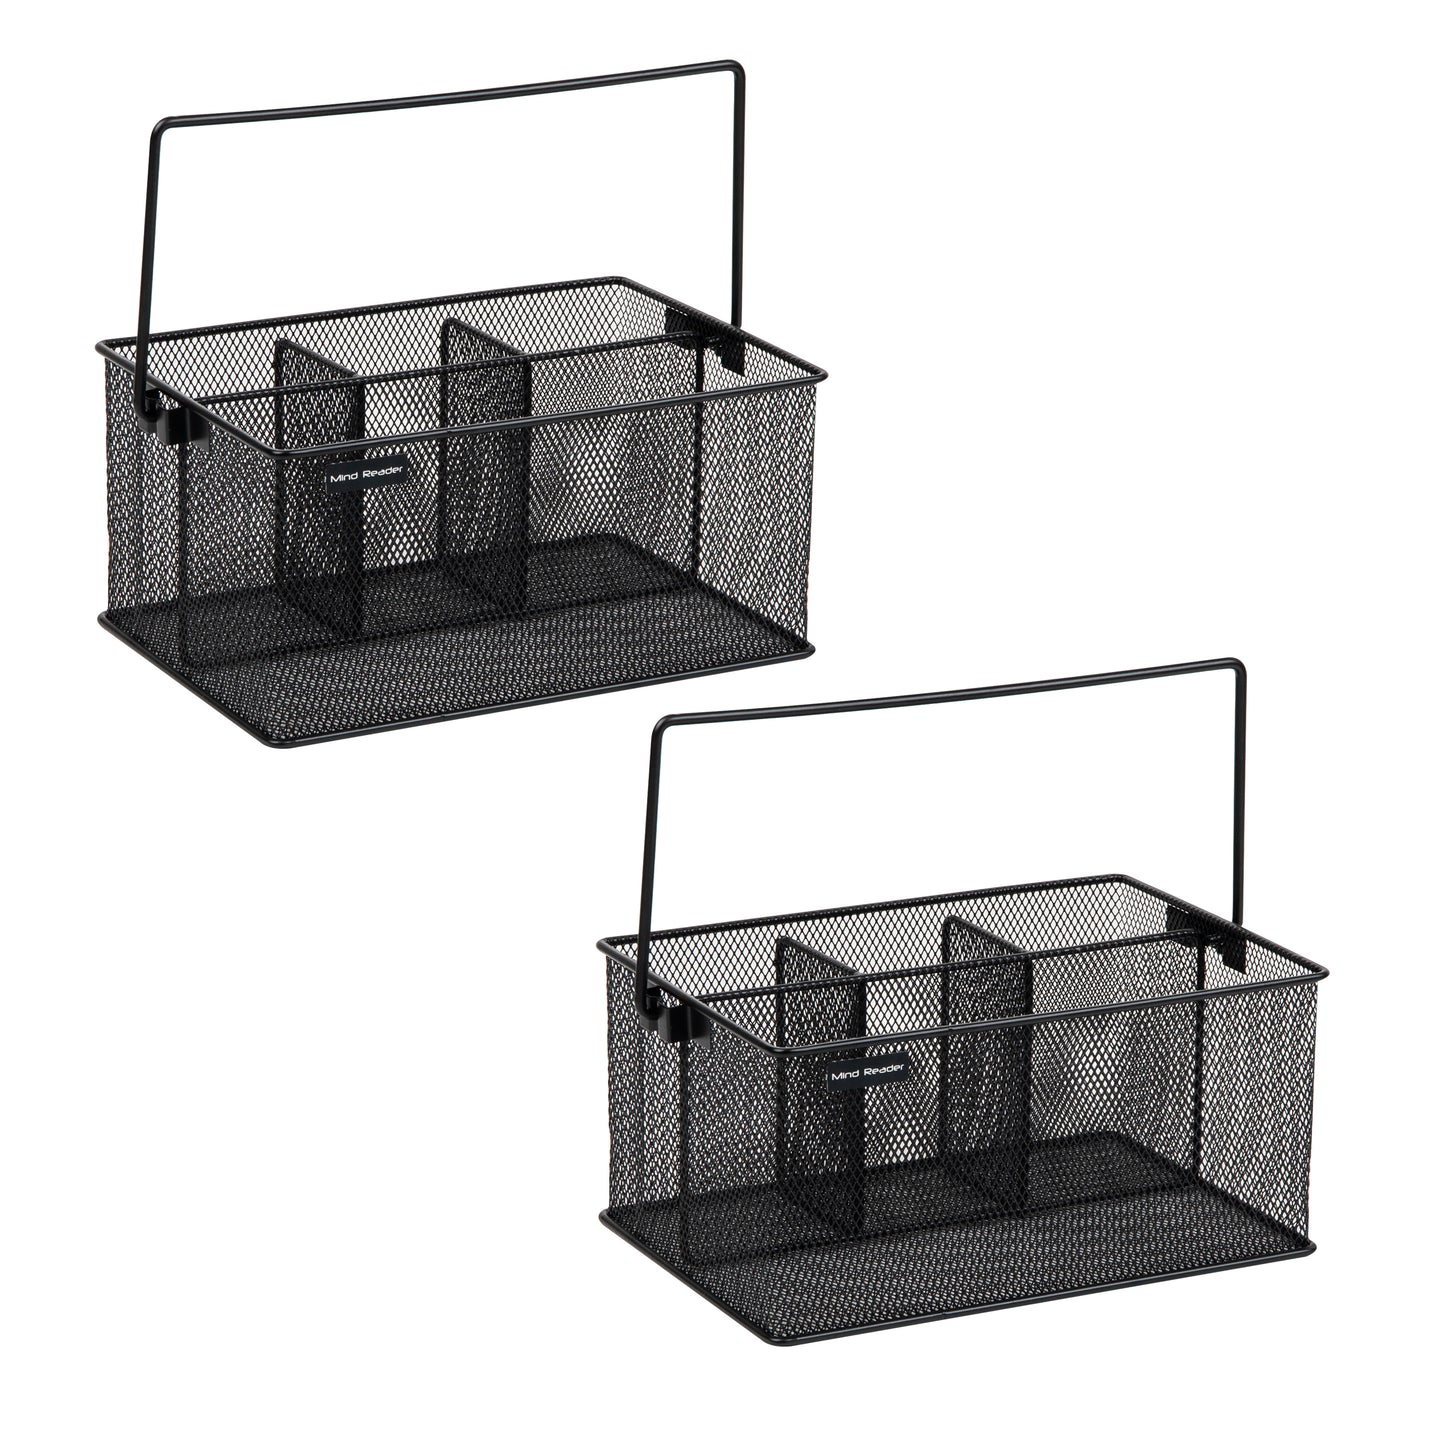 Mind Reader Network Collection, 4-Compartment Utensil or Supply Caddy with Handle, Countertop or Desktop Organizer, Metal Mesh